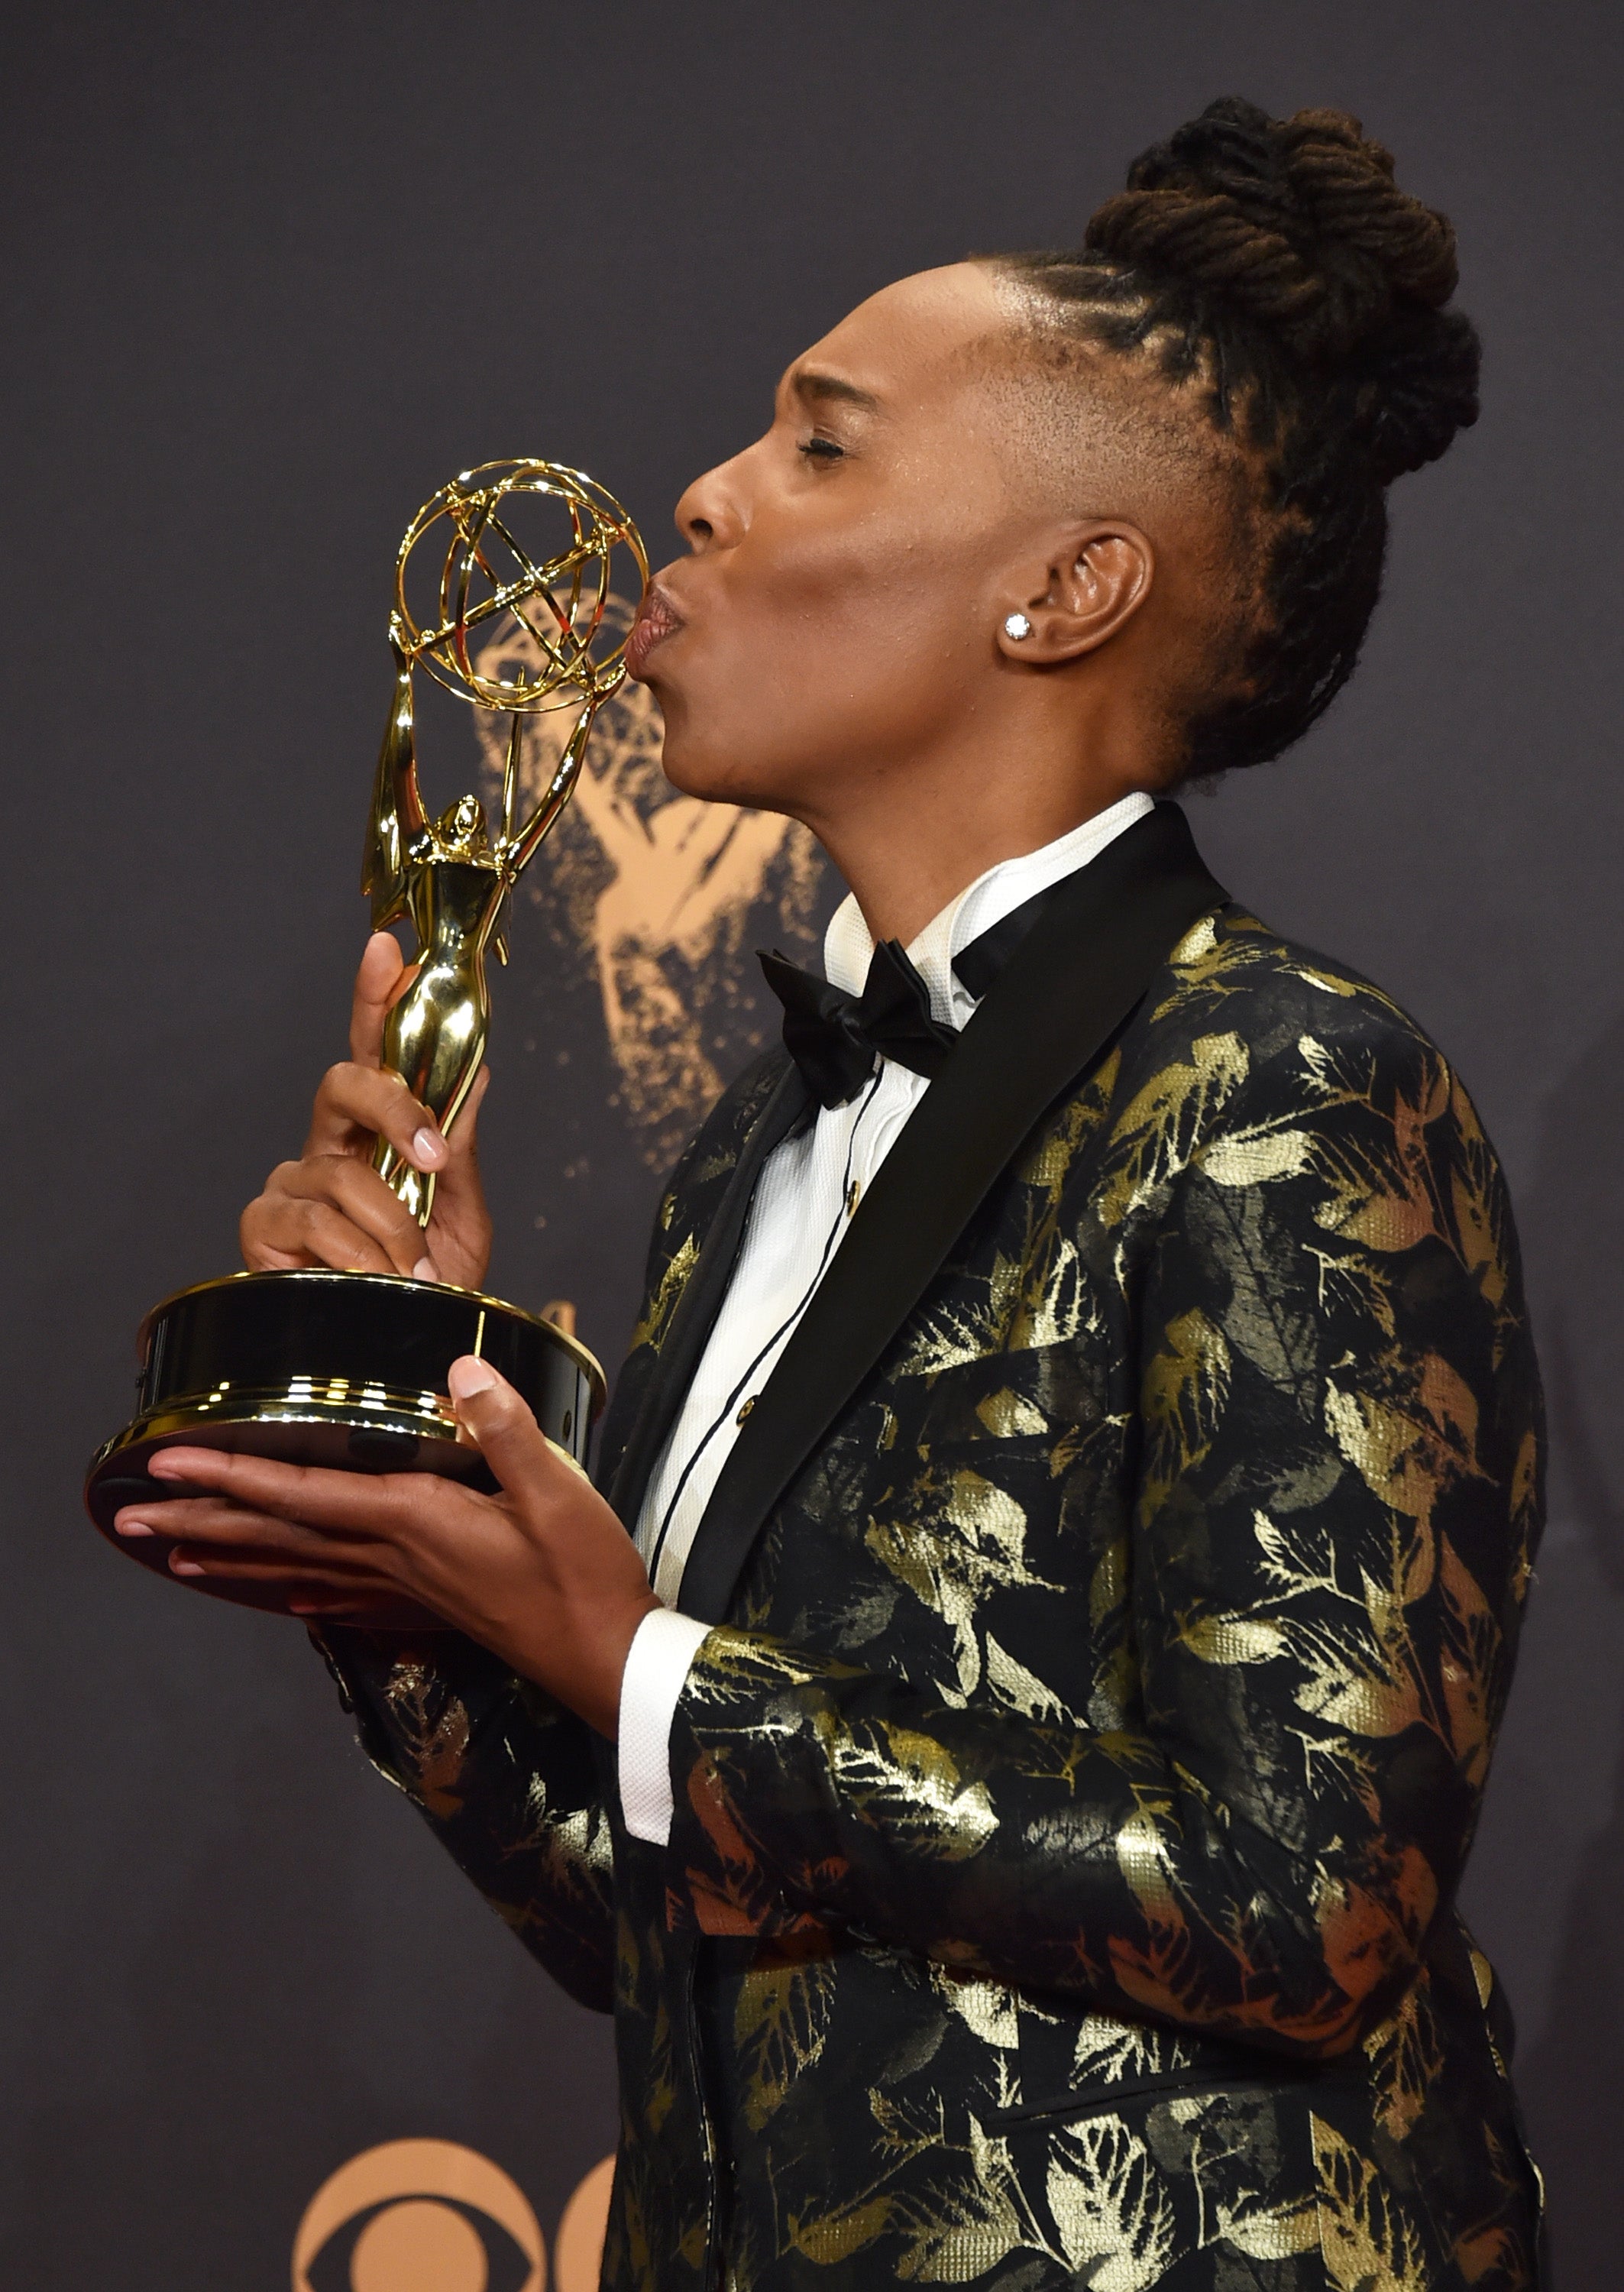 7 Of The Blackest Moments From The 2017 Emmy Awards
